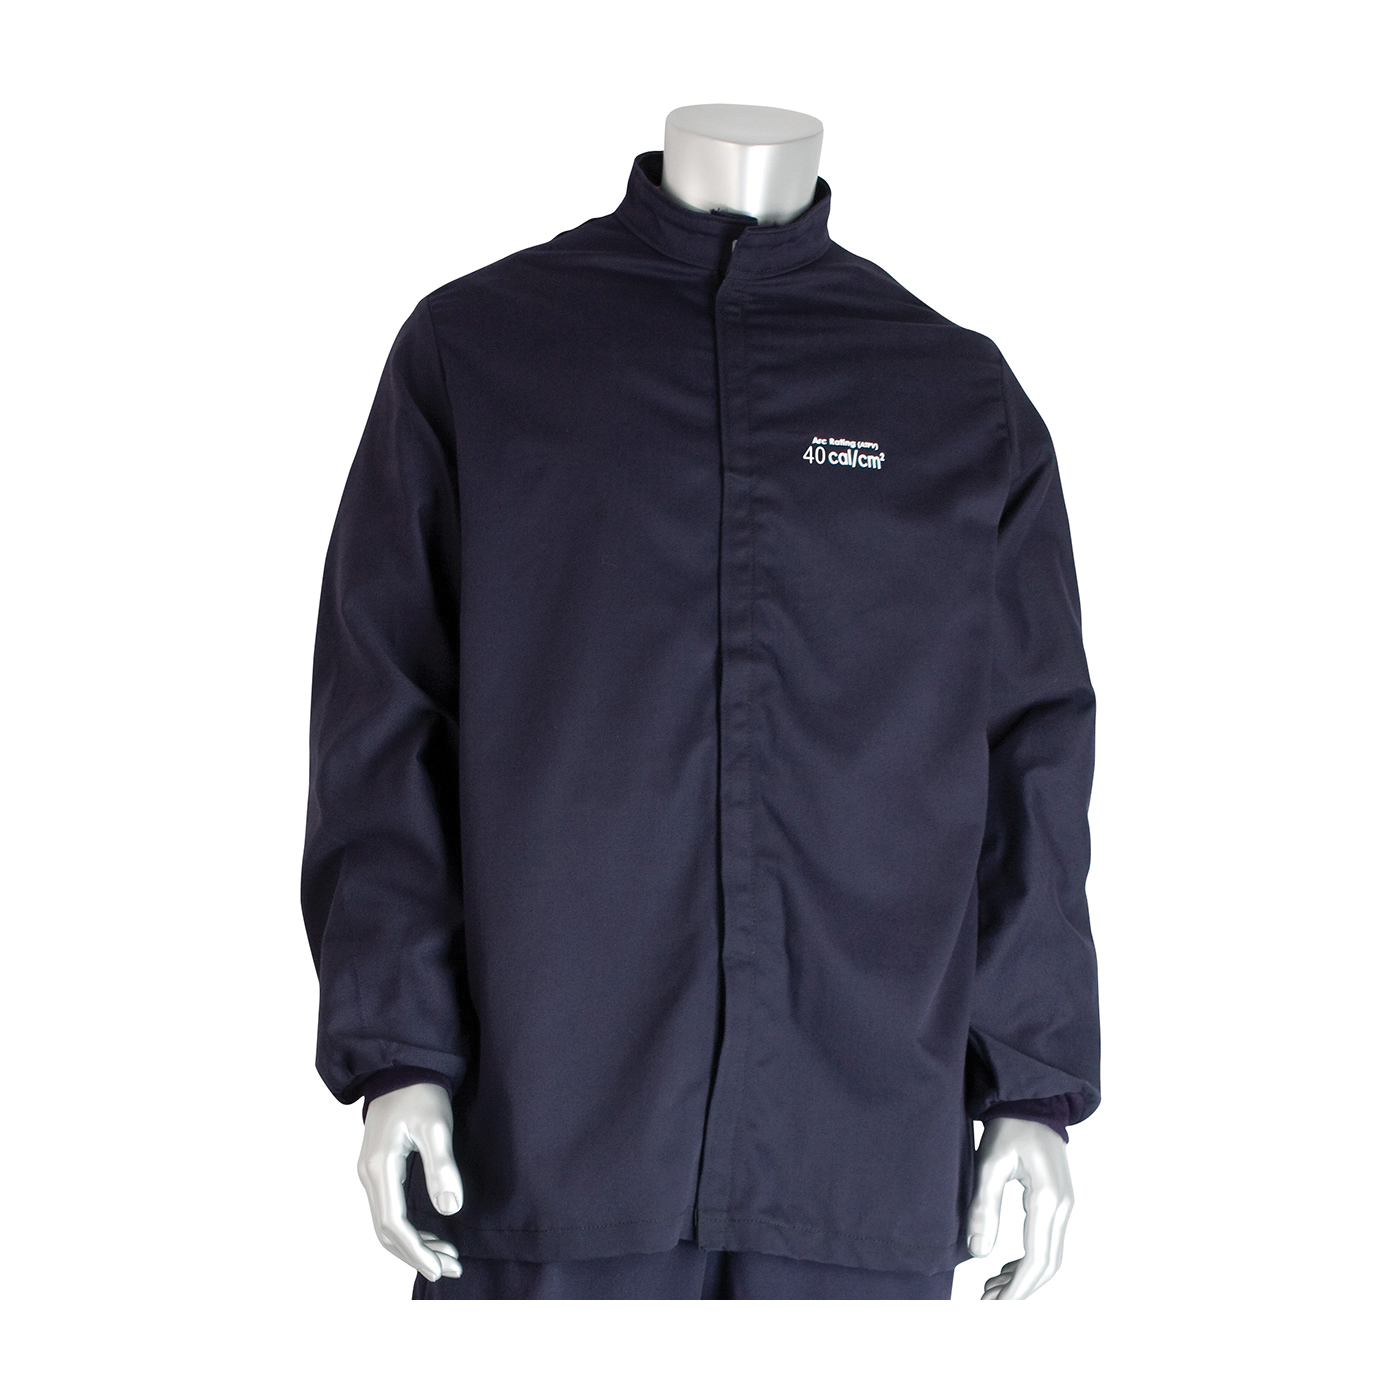 PIP® 9100-52412/L Arc and Flame Resistant Jacket, L, Navy, Westex® UltraSoft® 88% Cotton 12% High Tenacity Nylon, 44 to 46 in Chest, Resists: Arc and Flame, ASTM F1506-10a, ASTM F2178-12